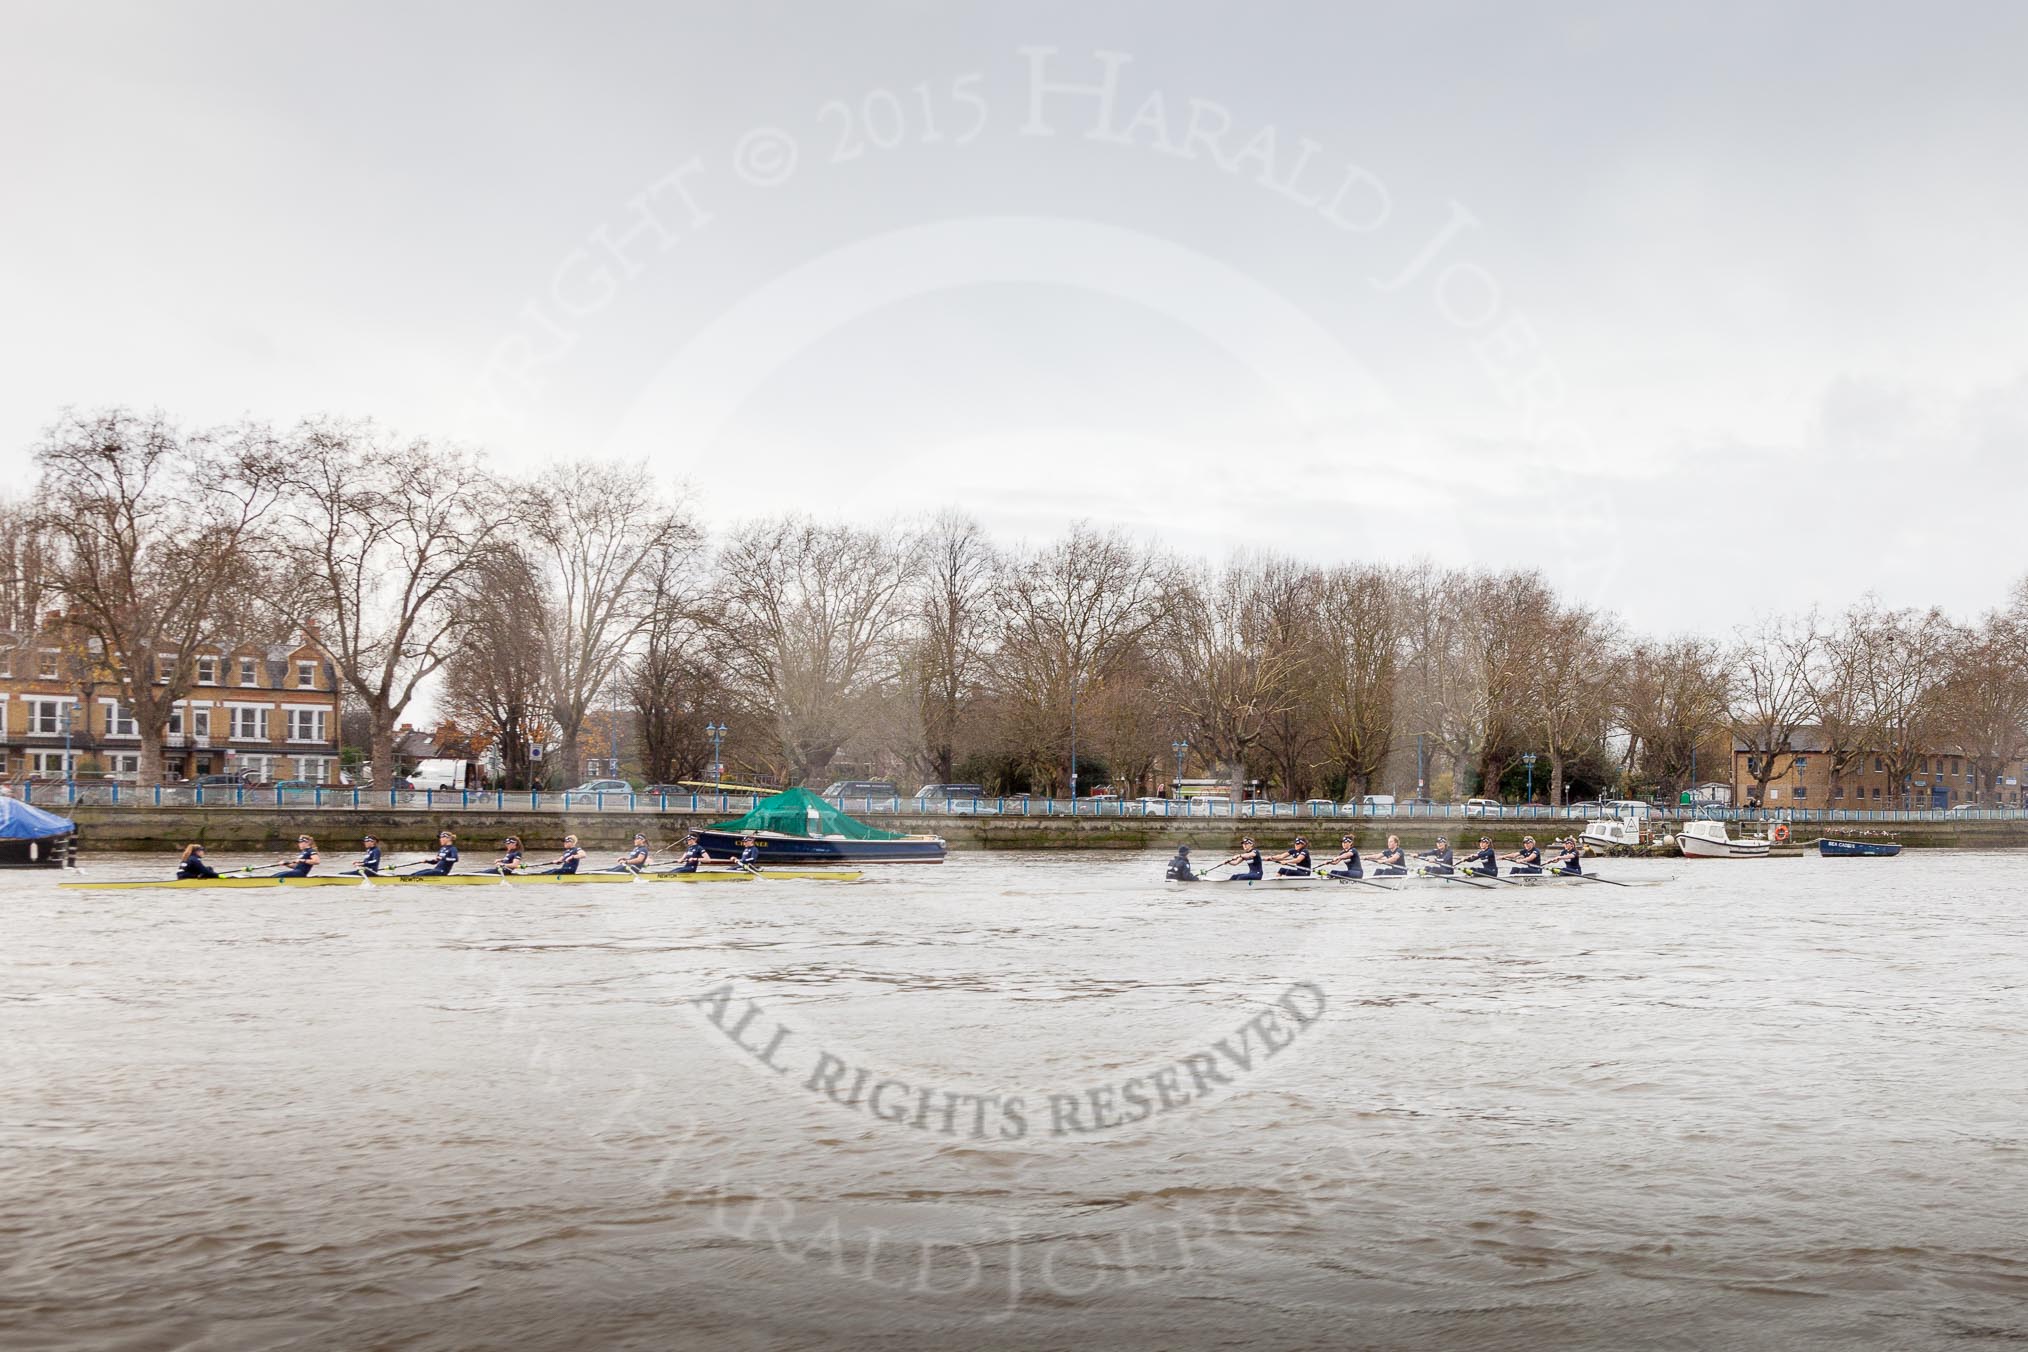 The Boat Race season 2016 - Women's Boat Race Trial Eights (OUWBC, Oxford): "Charybdis" and "Scylla" at the boathouses, with "Scylla" leading.
River Thames between Putney Bridge and Mortlake,
London SW15,

United Kingdom,
on 10 December 2015 at 12:19, image #161